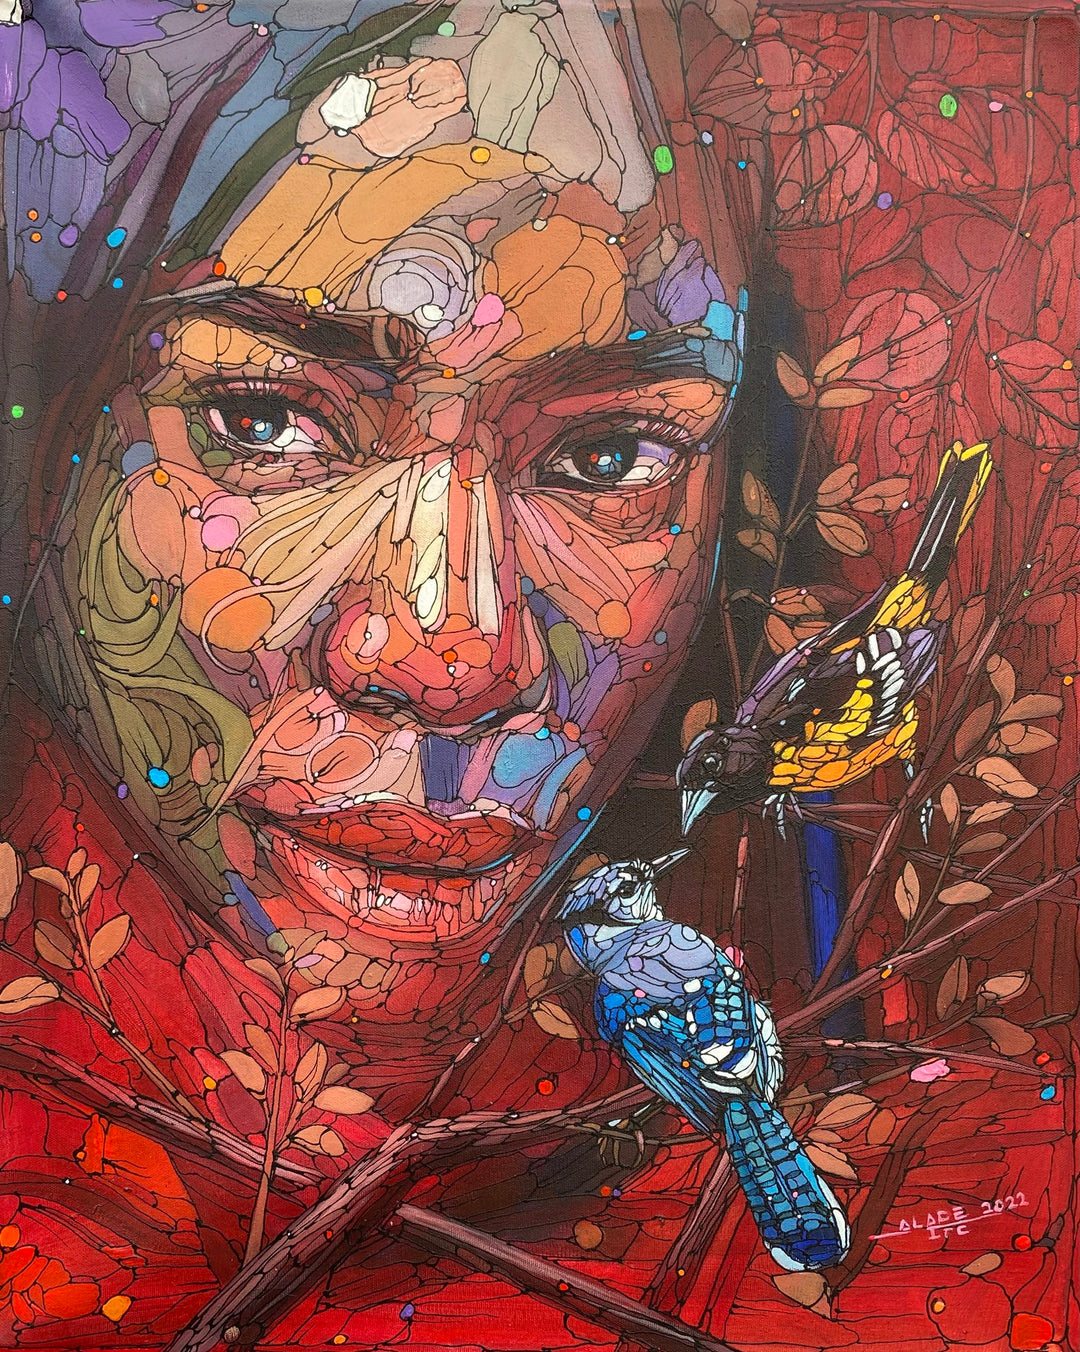 An Ifeoluwa Alade - "A Friend of All Season III" on canvas painting featuring a woman adorned with birds.